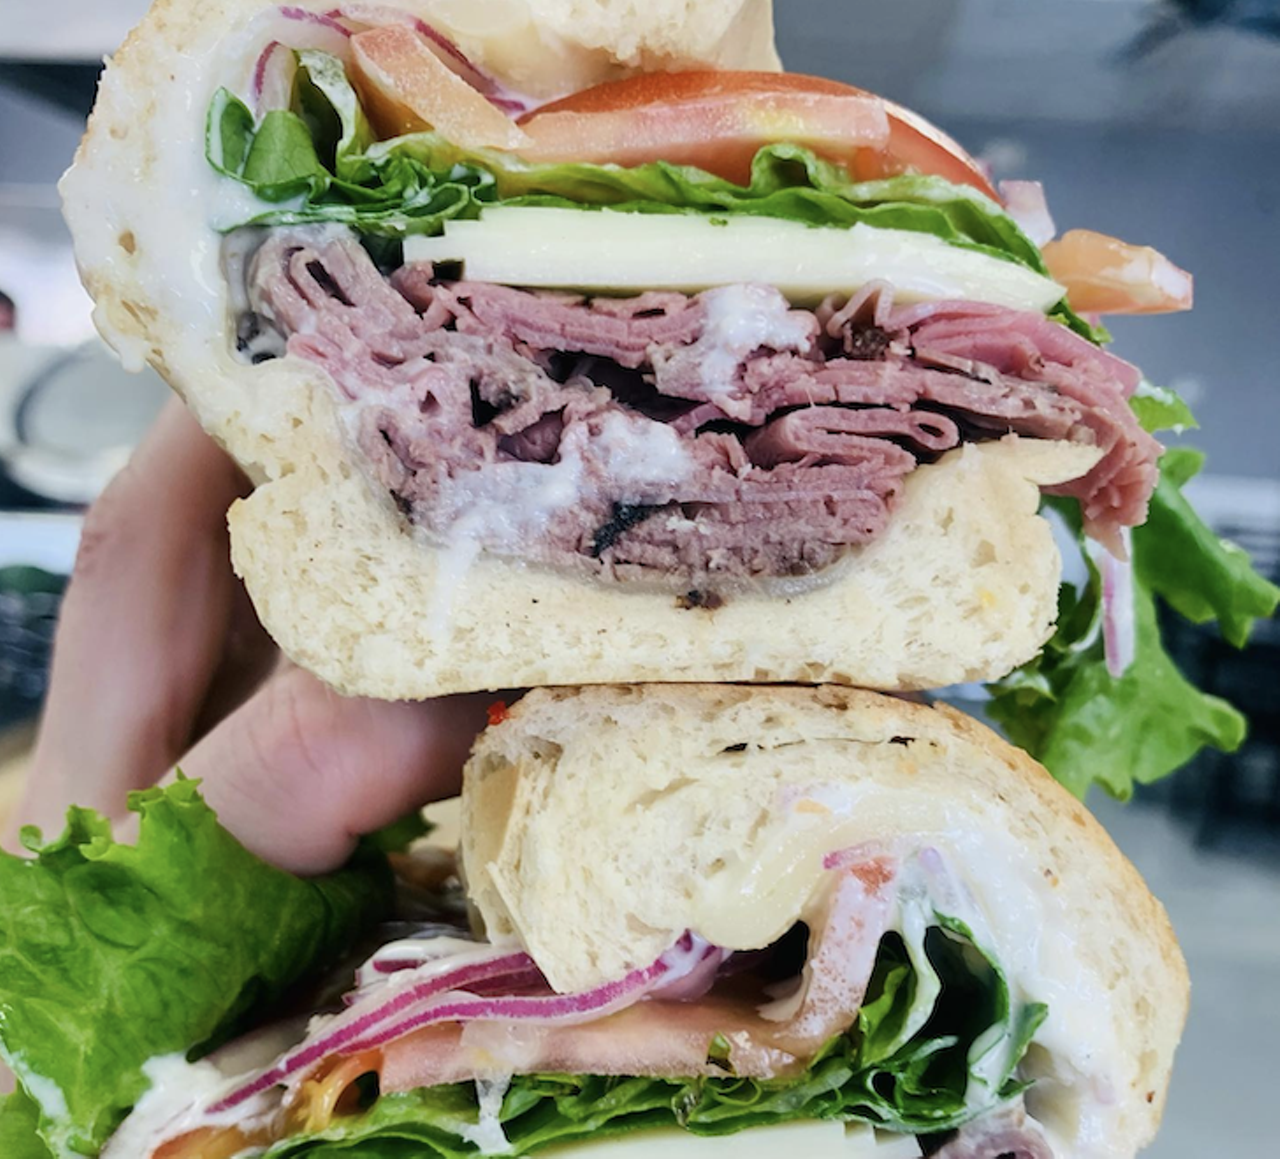 The Nosh Pit
4040 Park St. N, St. Petersburg, (727) 954-0757
Jewish deli classics: knishes, lox, all-beef hot dogs, egg creams, black and white cookies, latkes and matzo ball soup from the owners of The Wheelhouse.